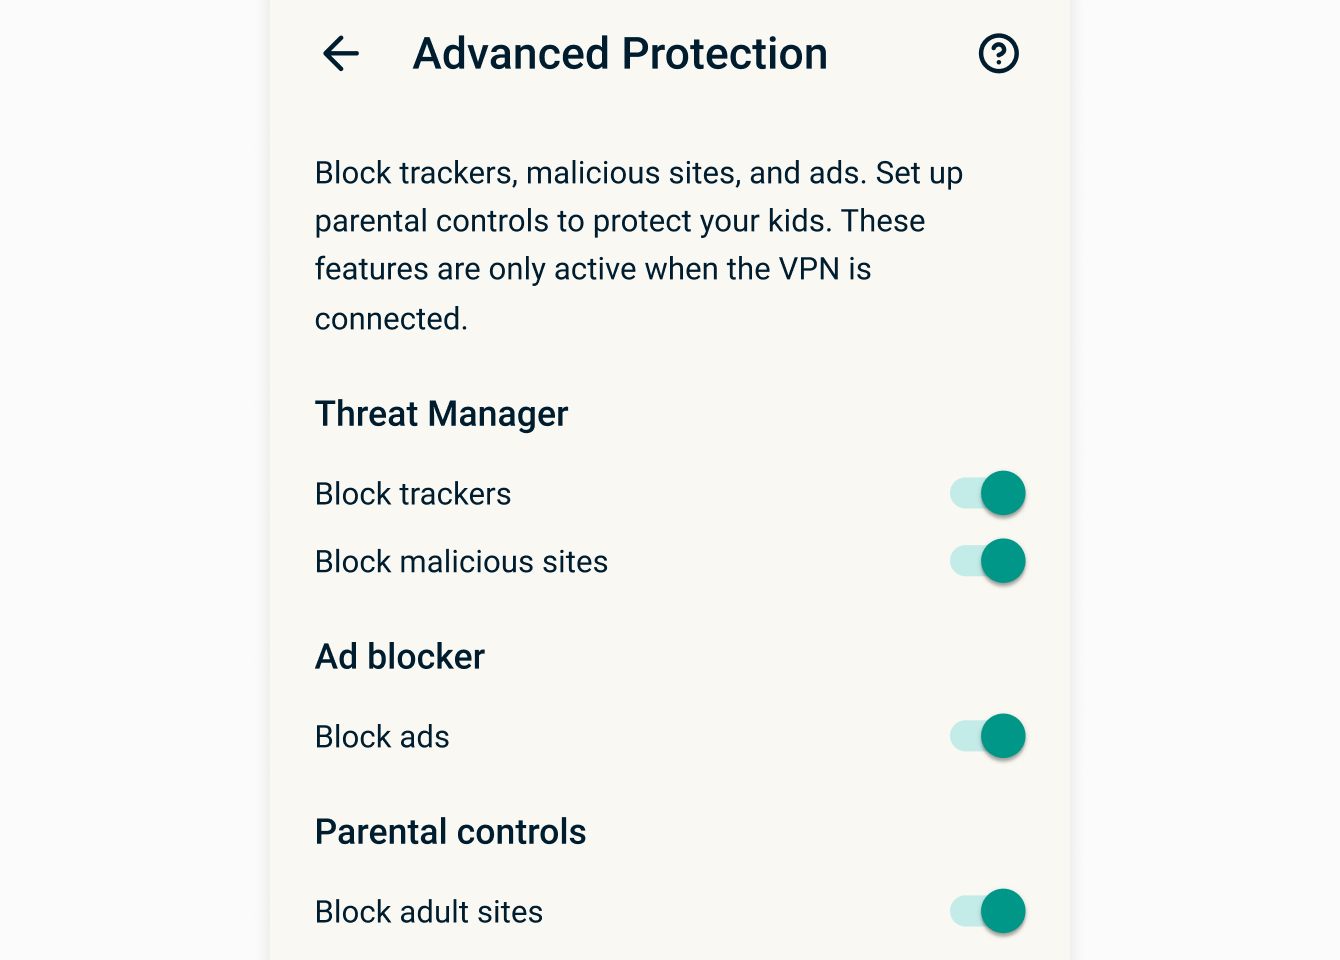 Advanced protection UI on Android